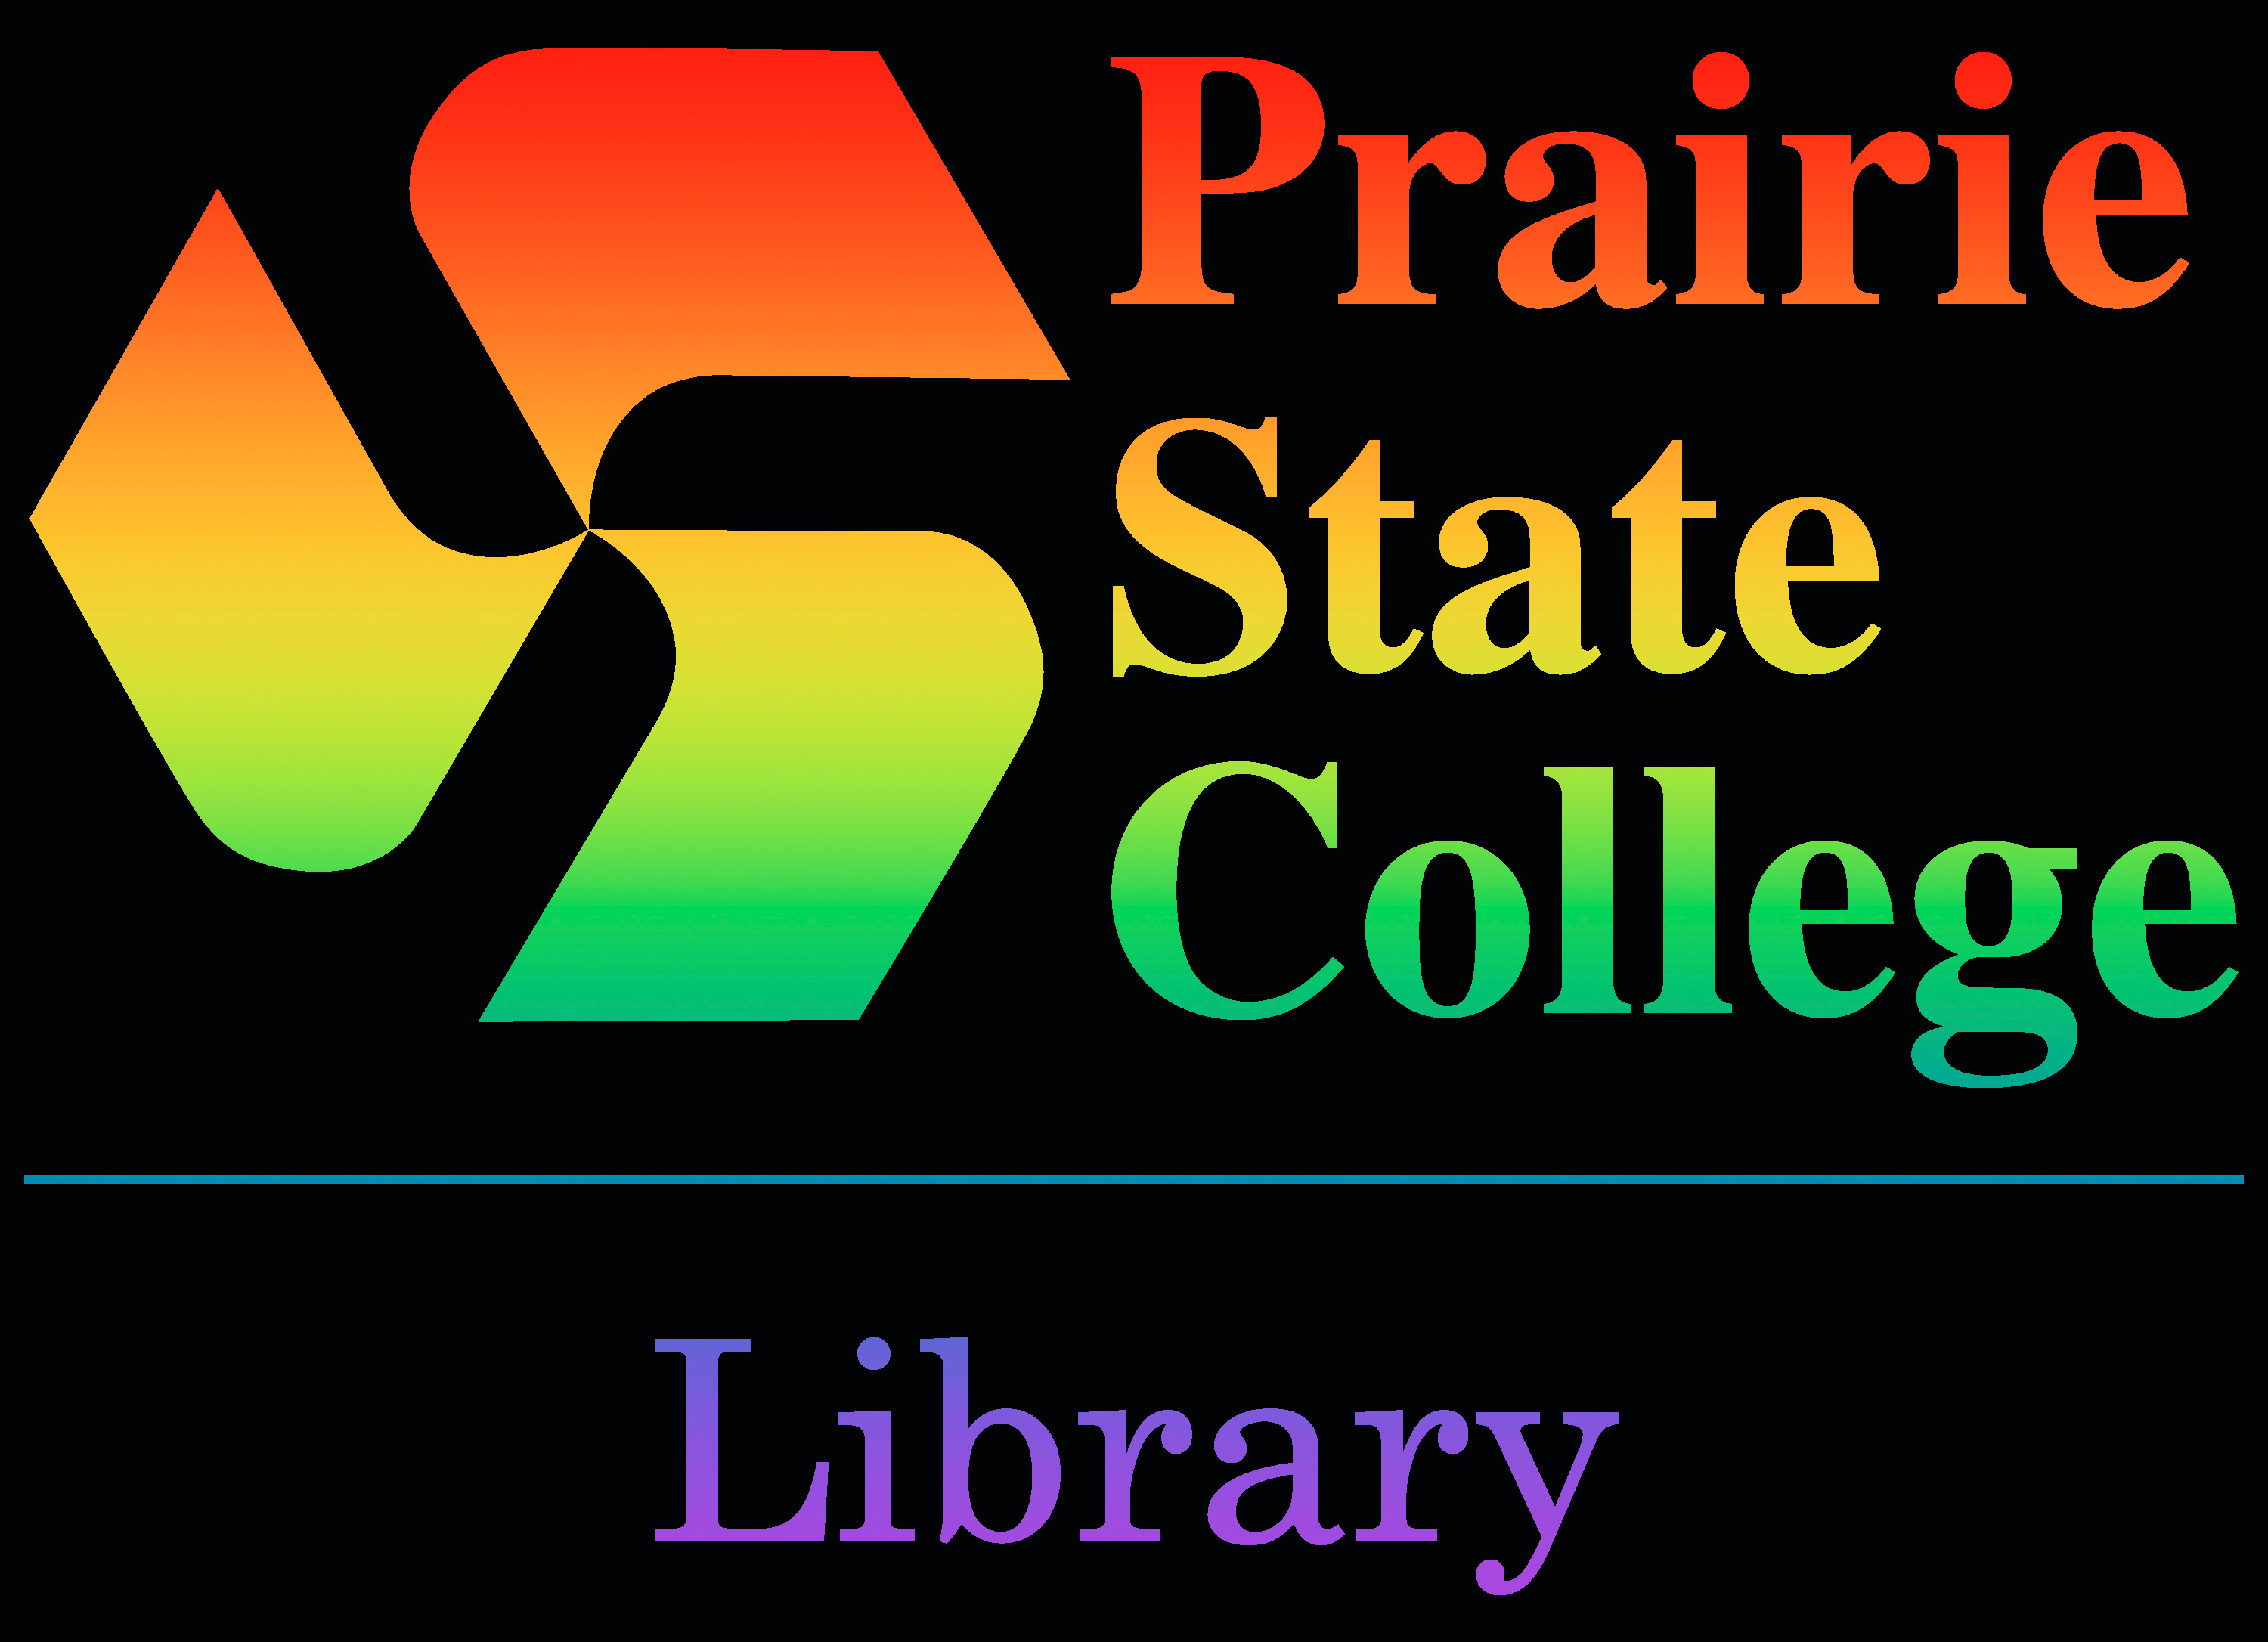 Prairie State College Library logo in pride colors